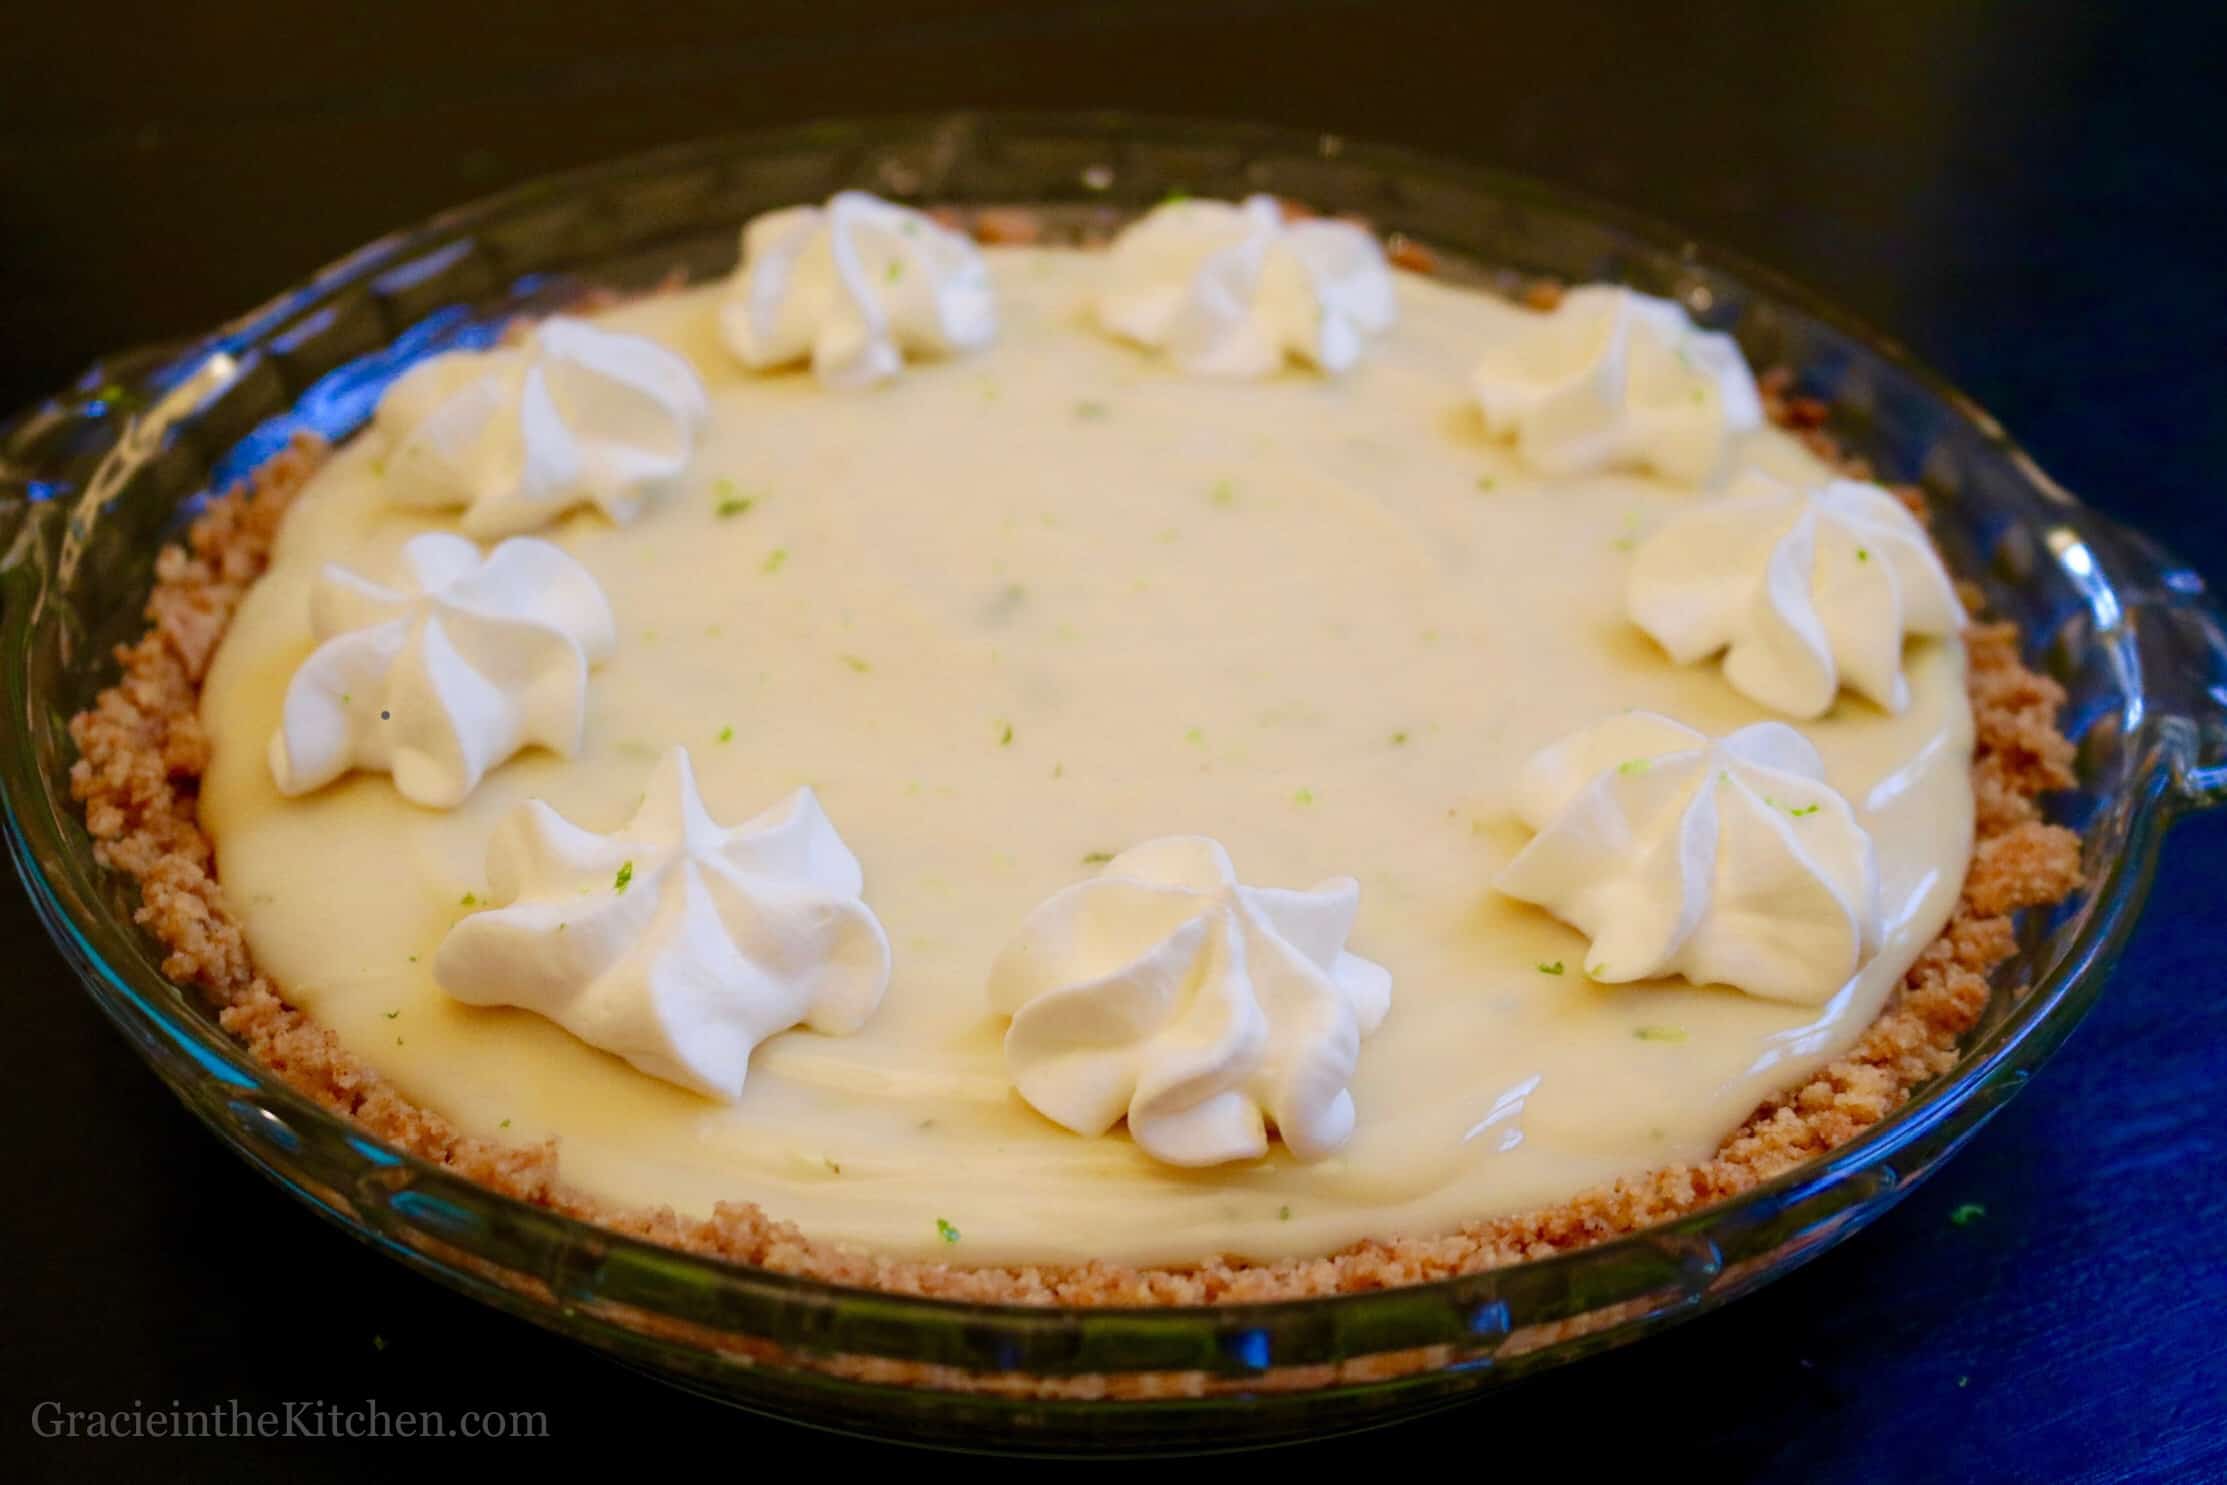 Best Key Lime Pie - Try this perfectly delicious, creamy key lime pie for yourself!